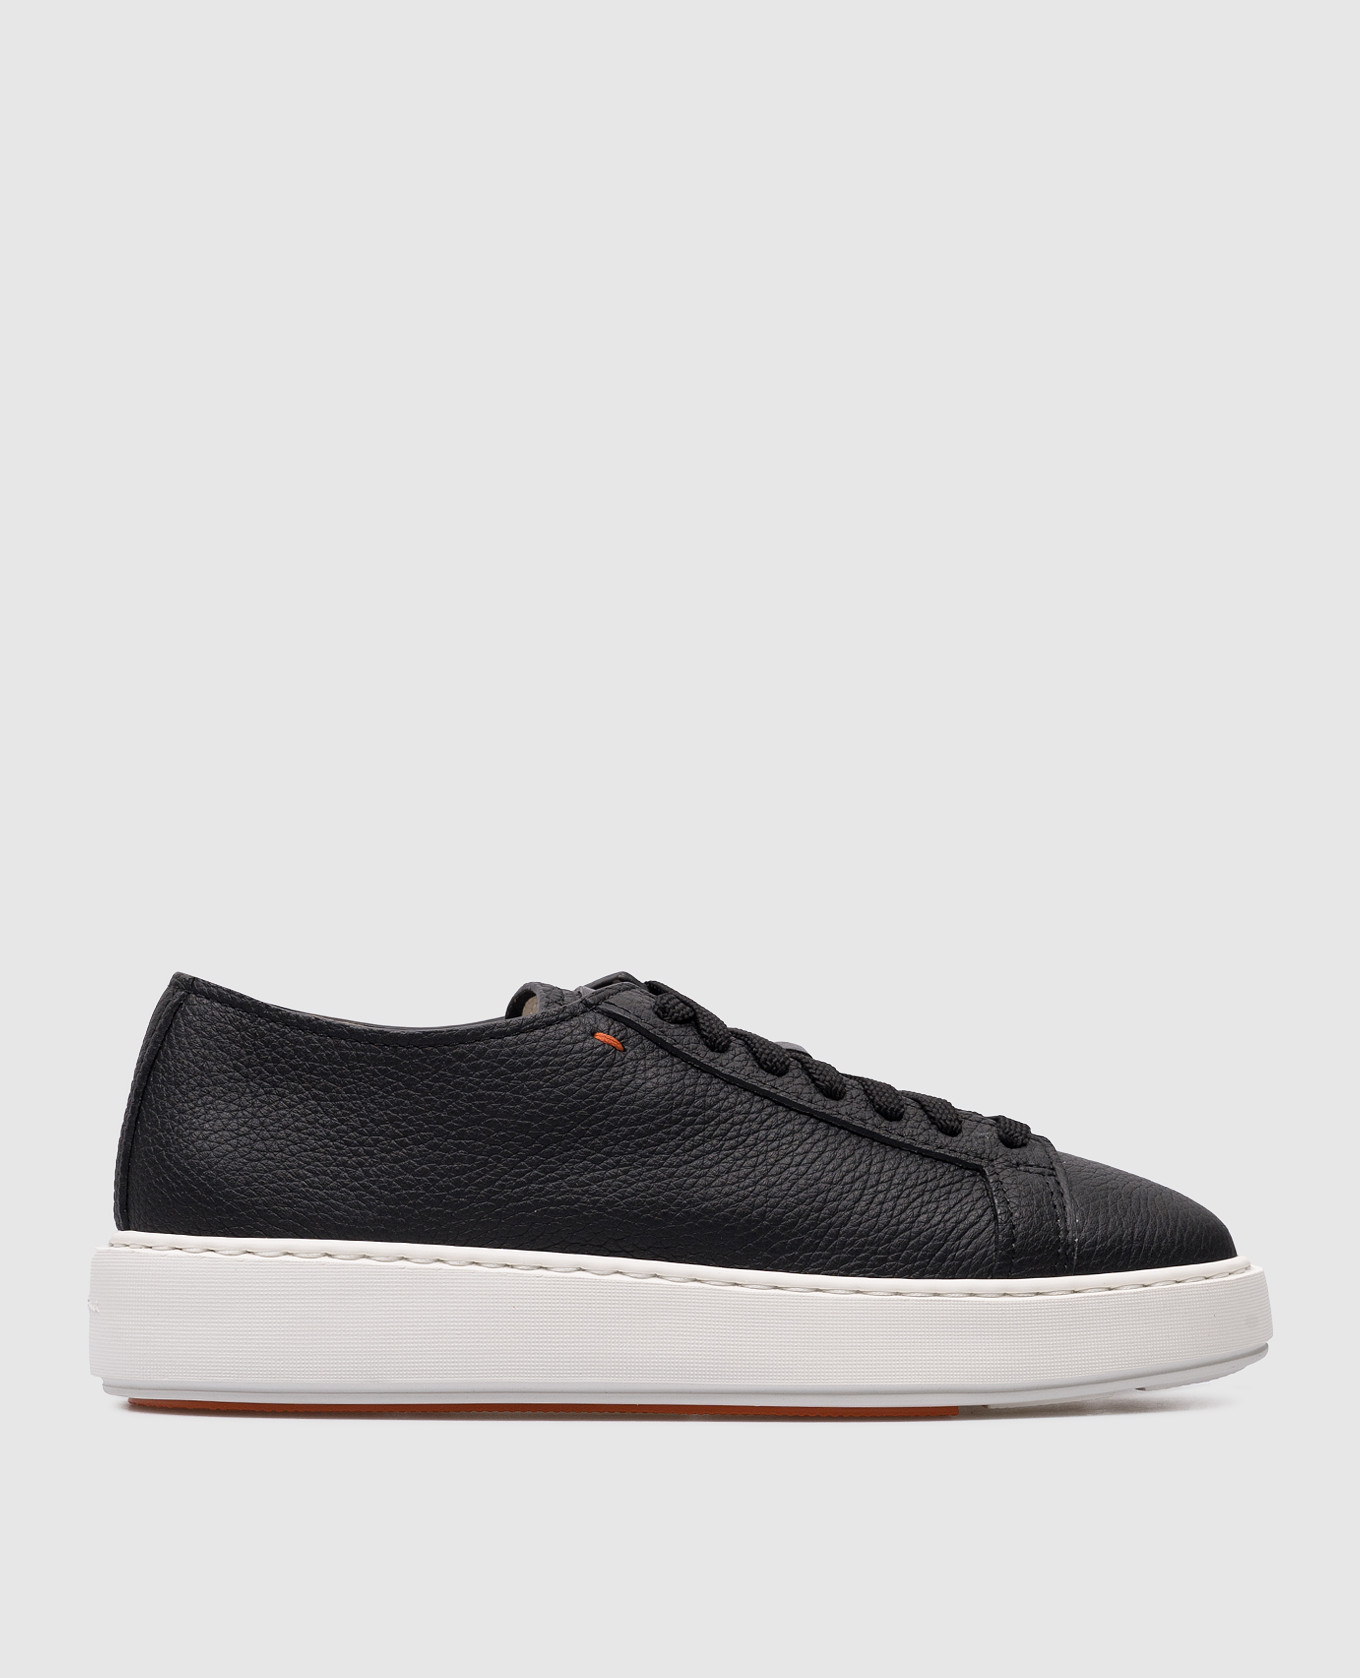 Black leather sneakers with textured logo